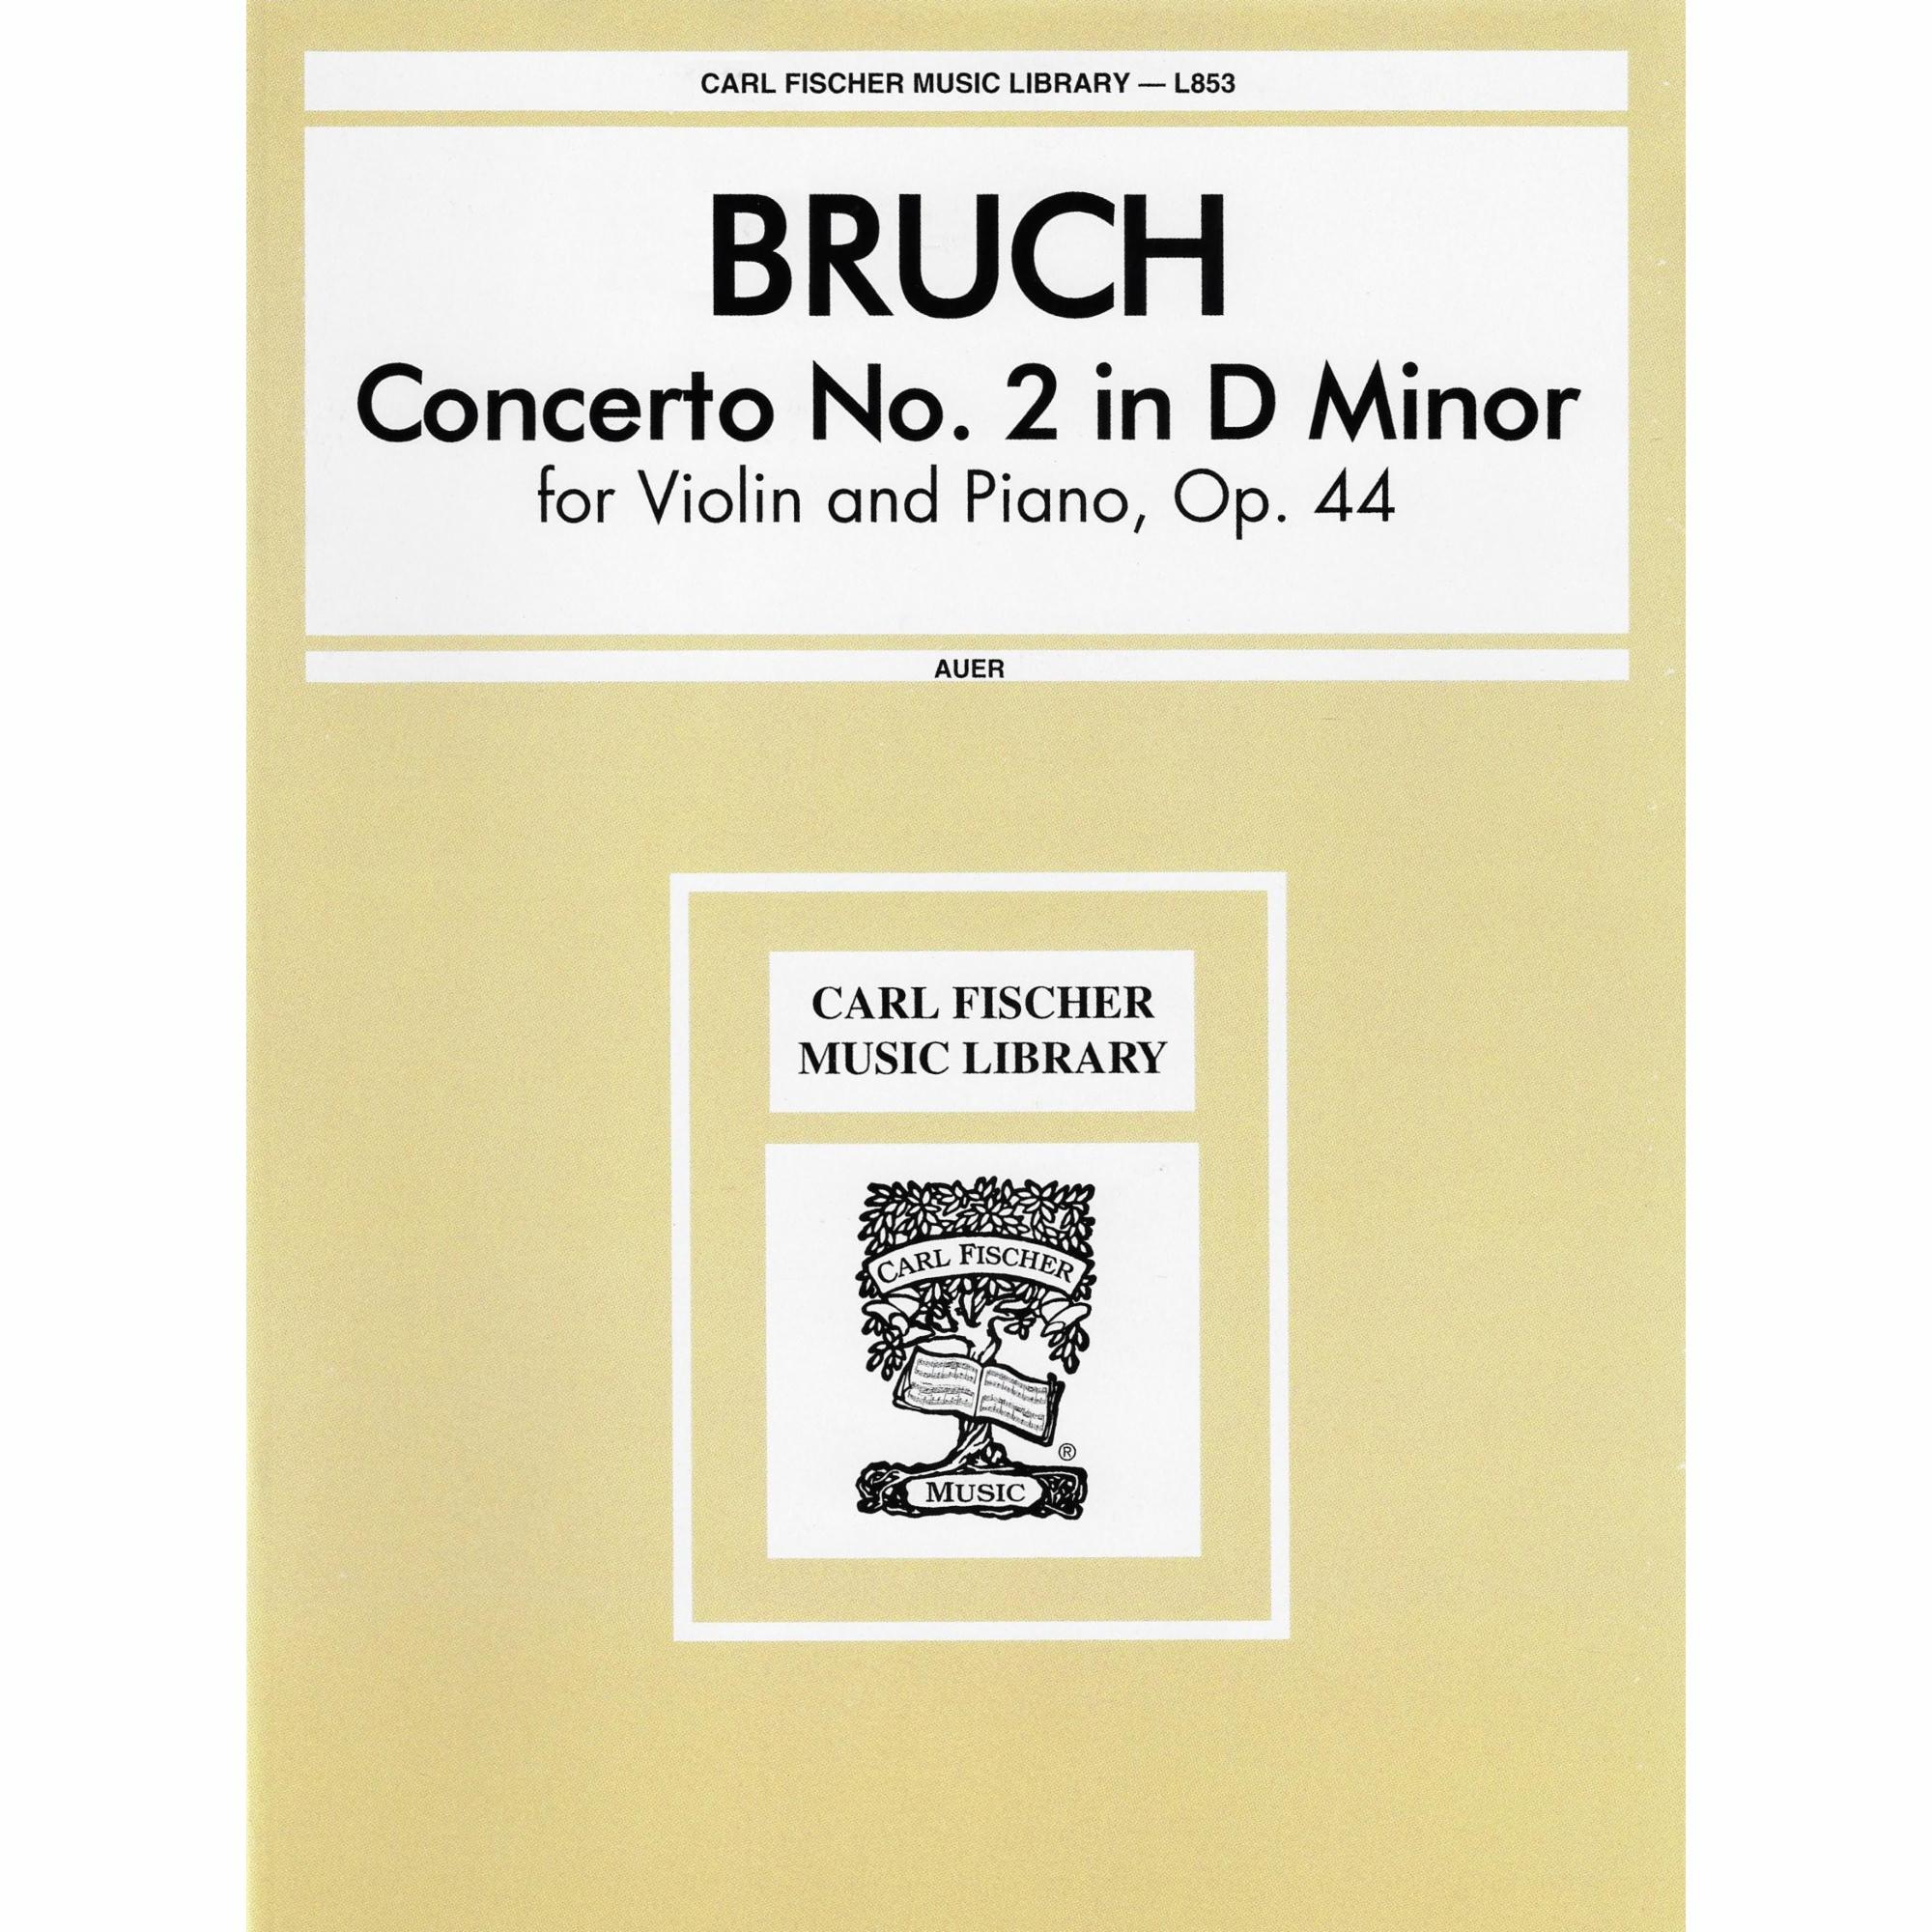 Bruch -- Concerto No. 2 in D Minor, Op. 44 for Violin and Piano